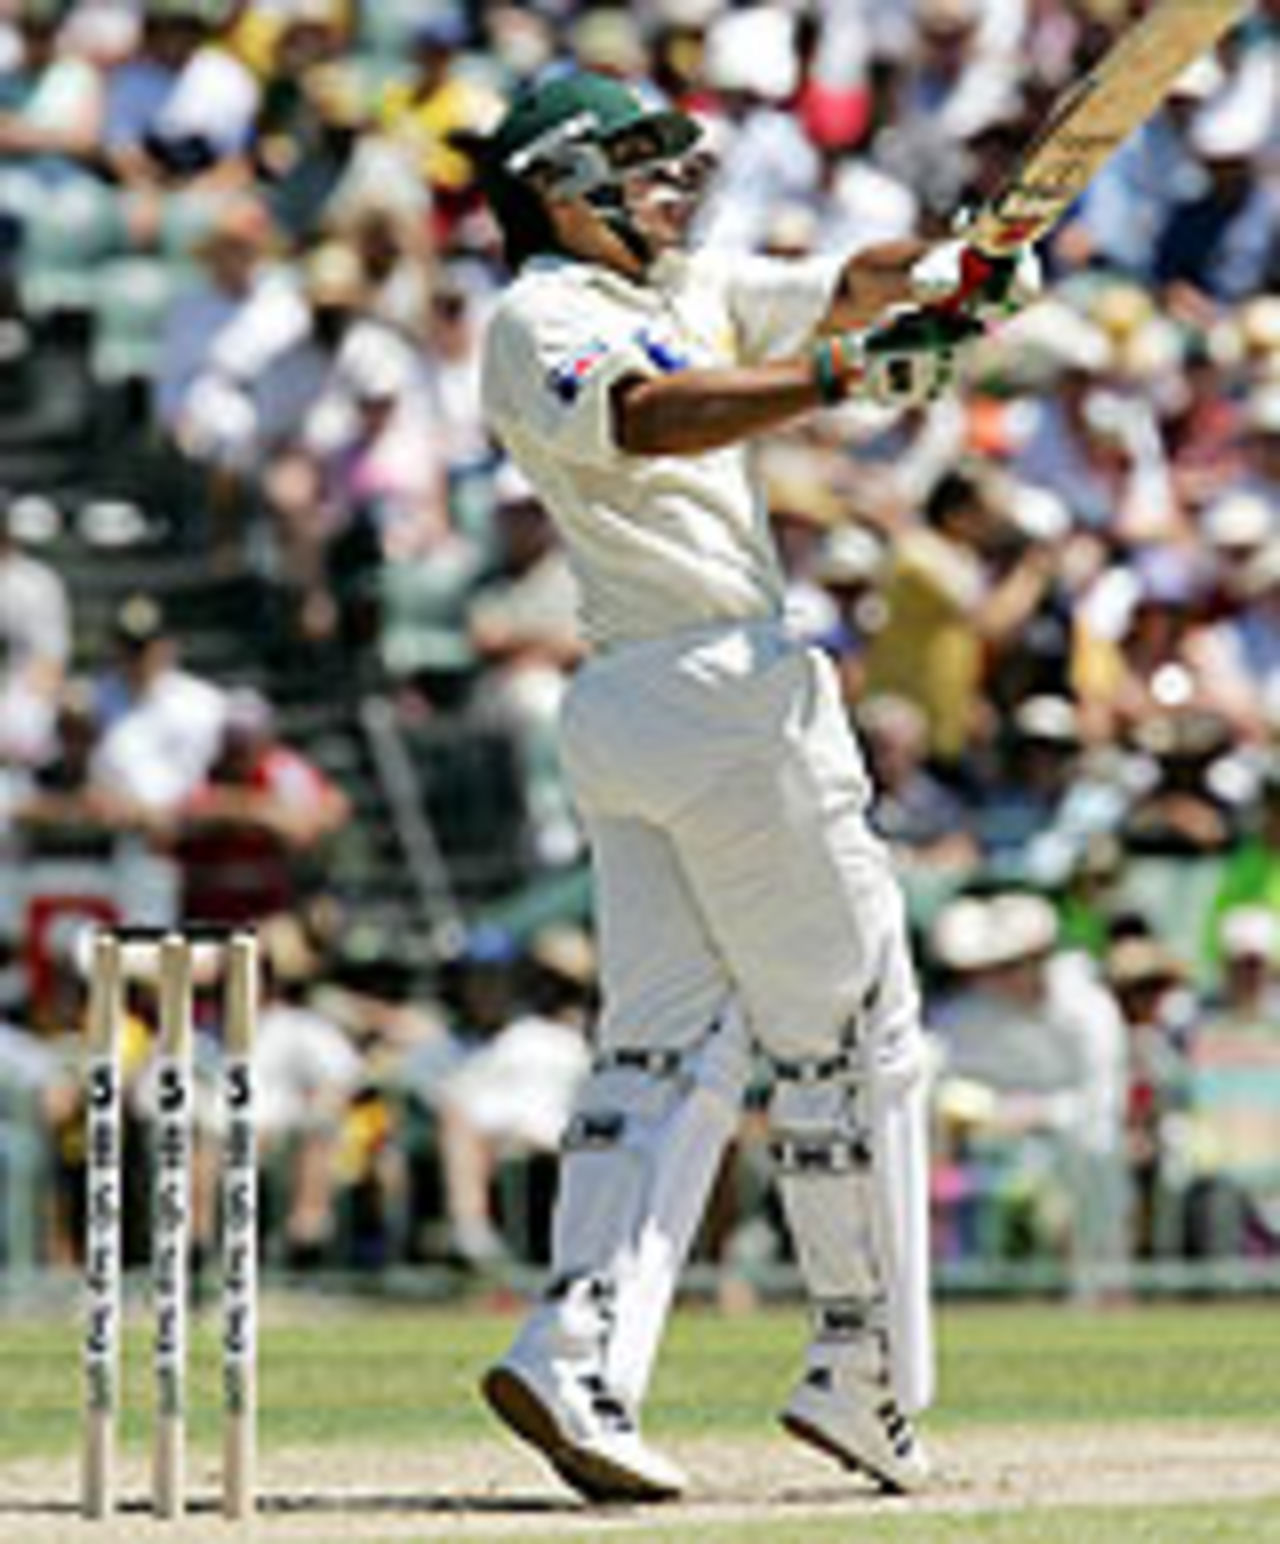 Salman Butt pulls one for four, Pakistanis v CA Chairman's XI, Lilac Hill, Perth, December 7, 2004